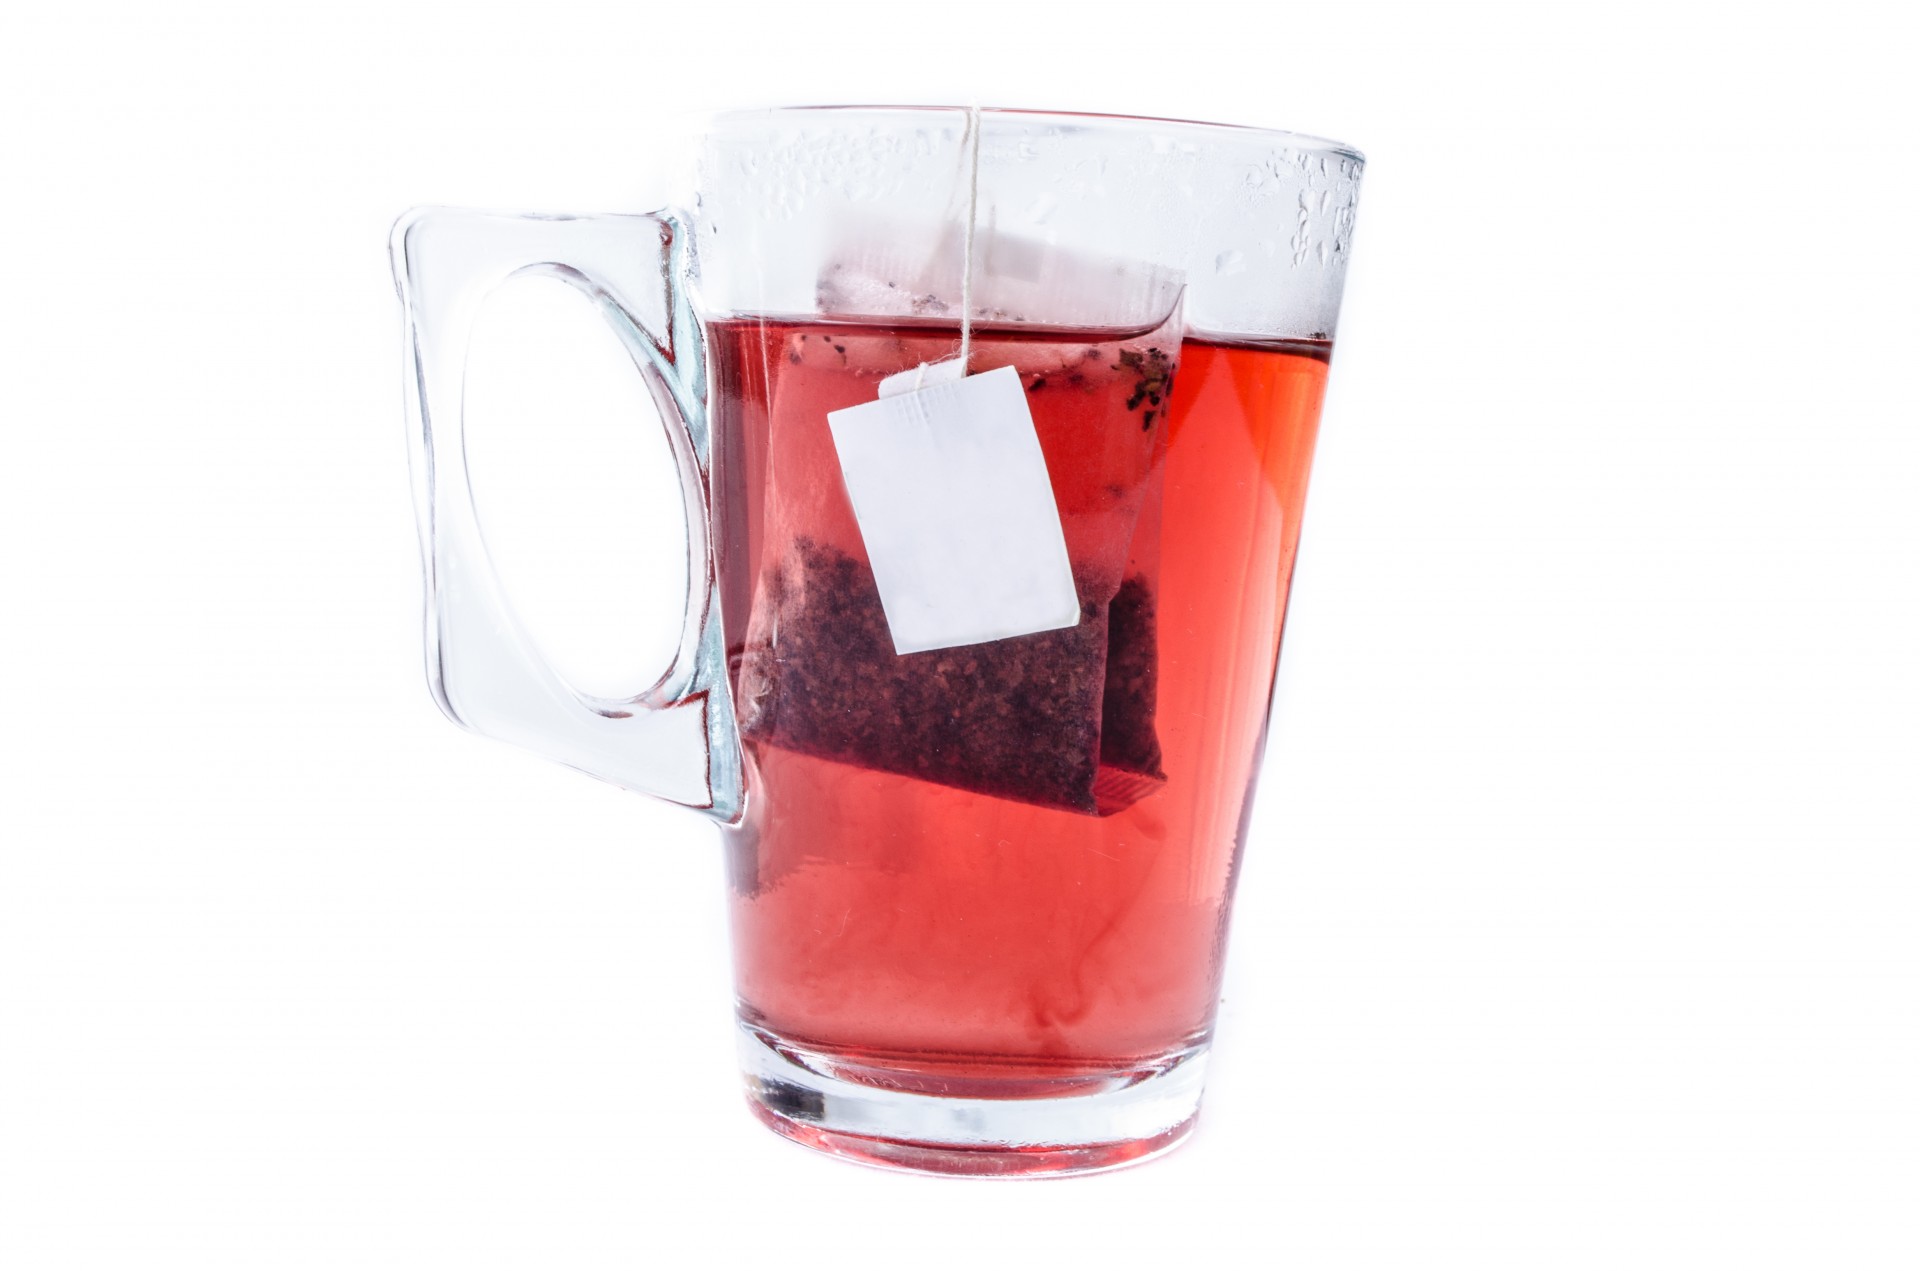 Glass Cup With Teabag